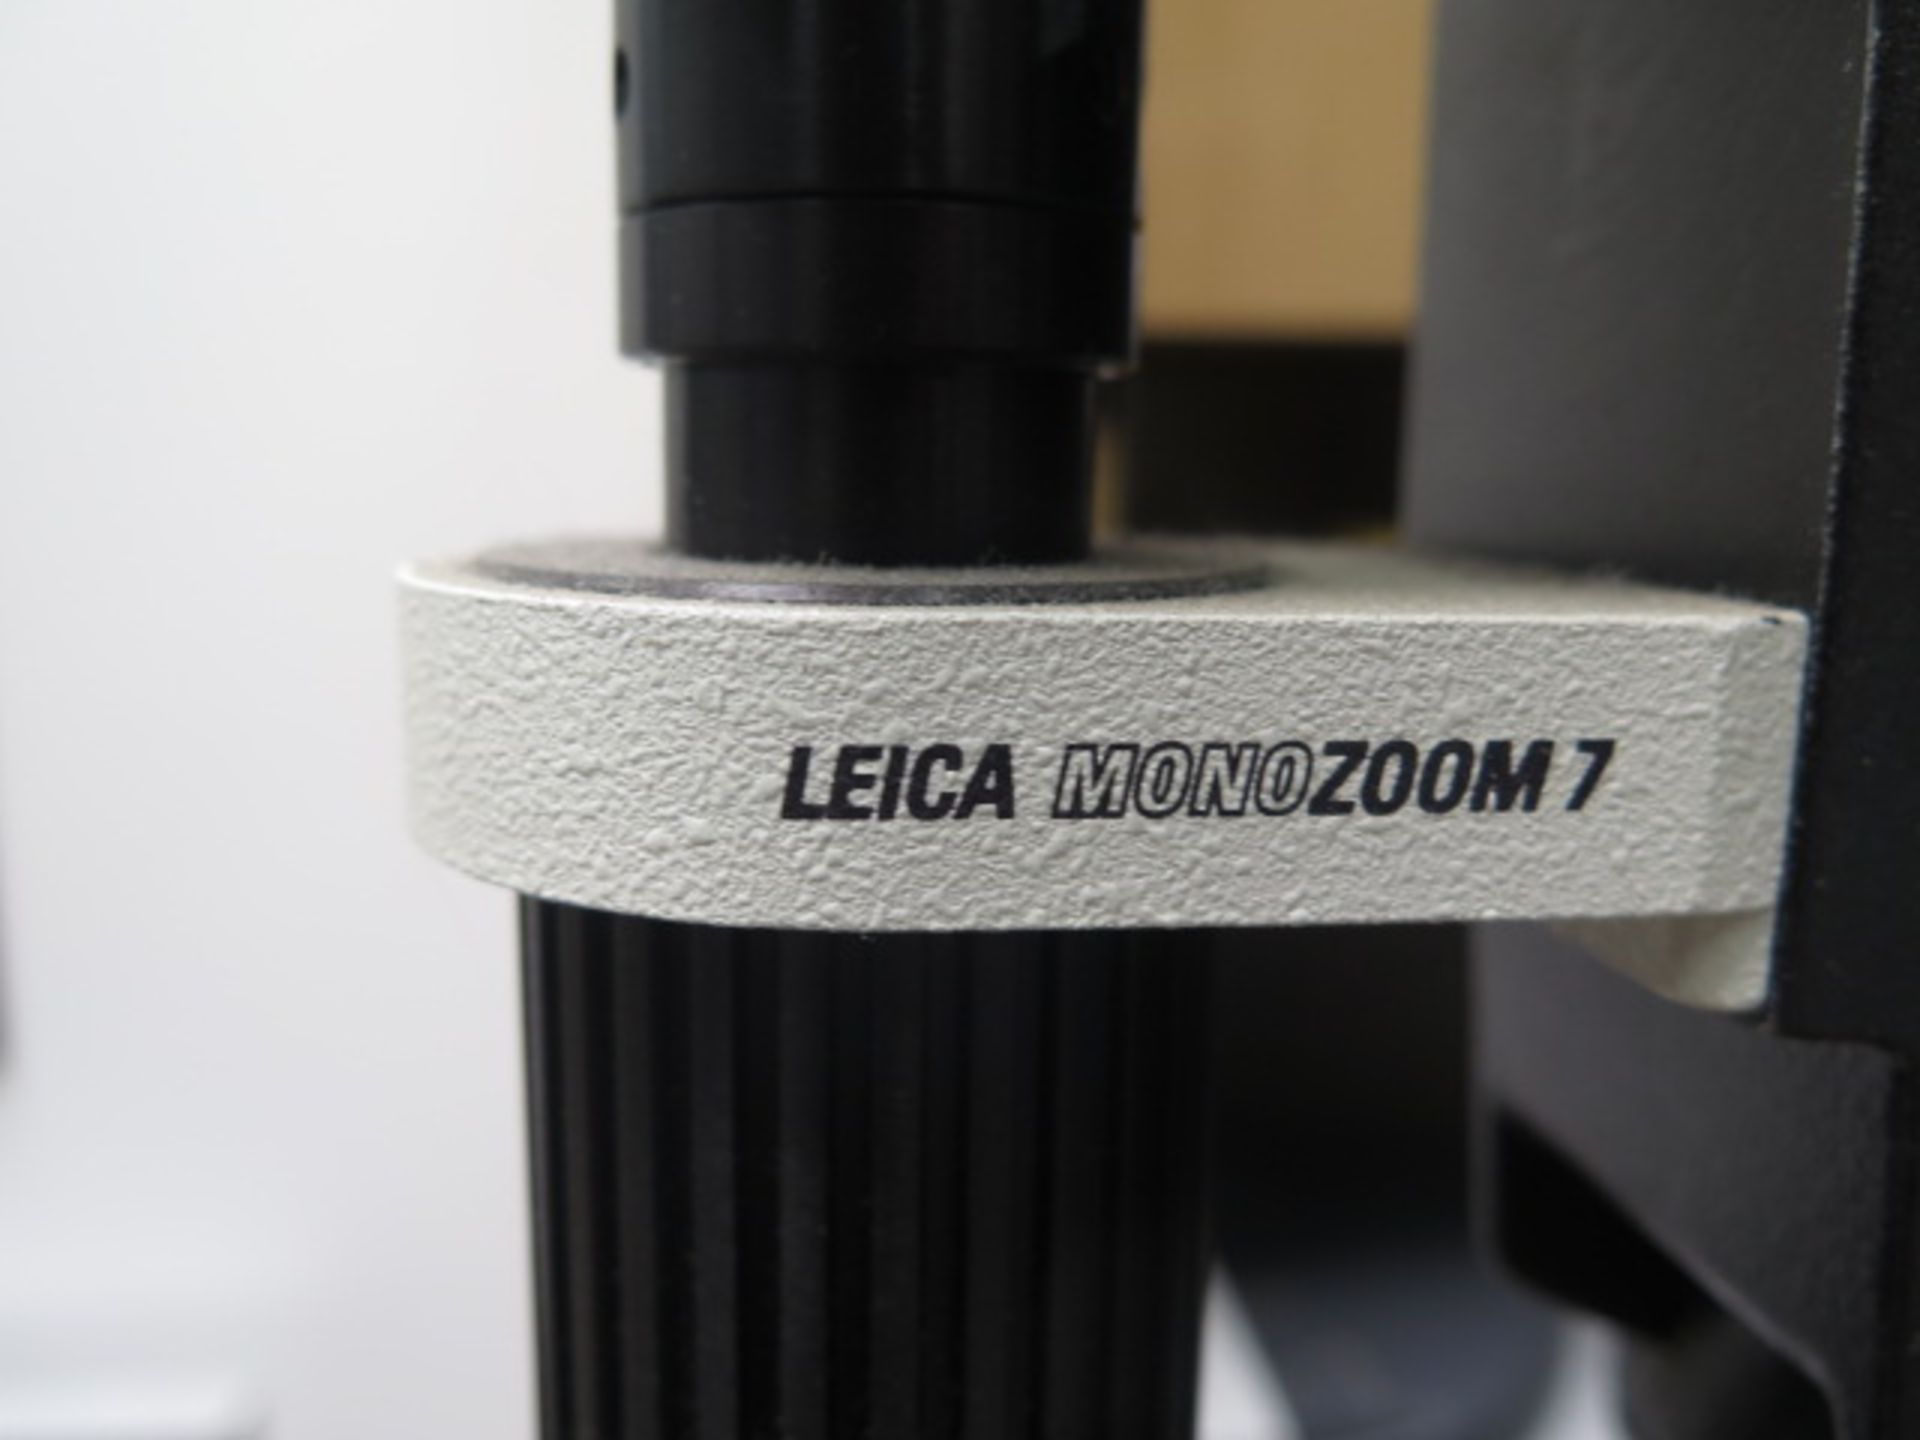 Leica Video Inspection Scope w/ Panasonic KR212 Color Camers, Monitor, Light Source, SOLD AS IS - Image 8 of 8